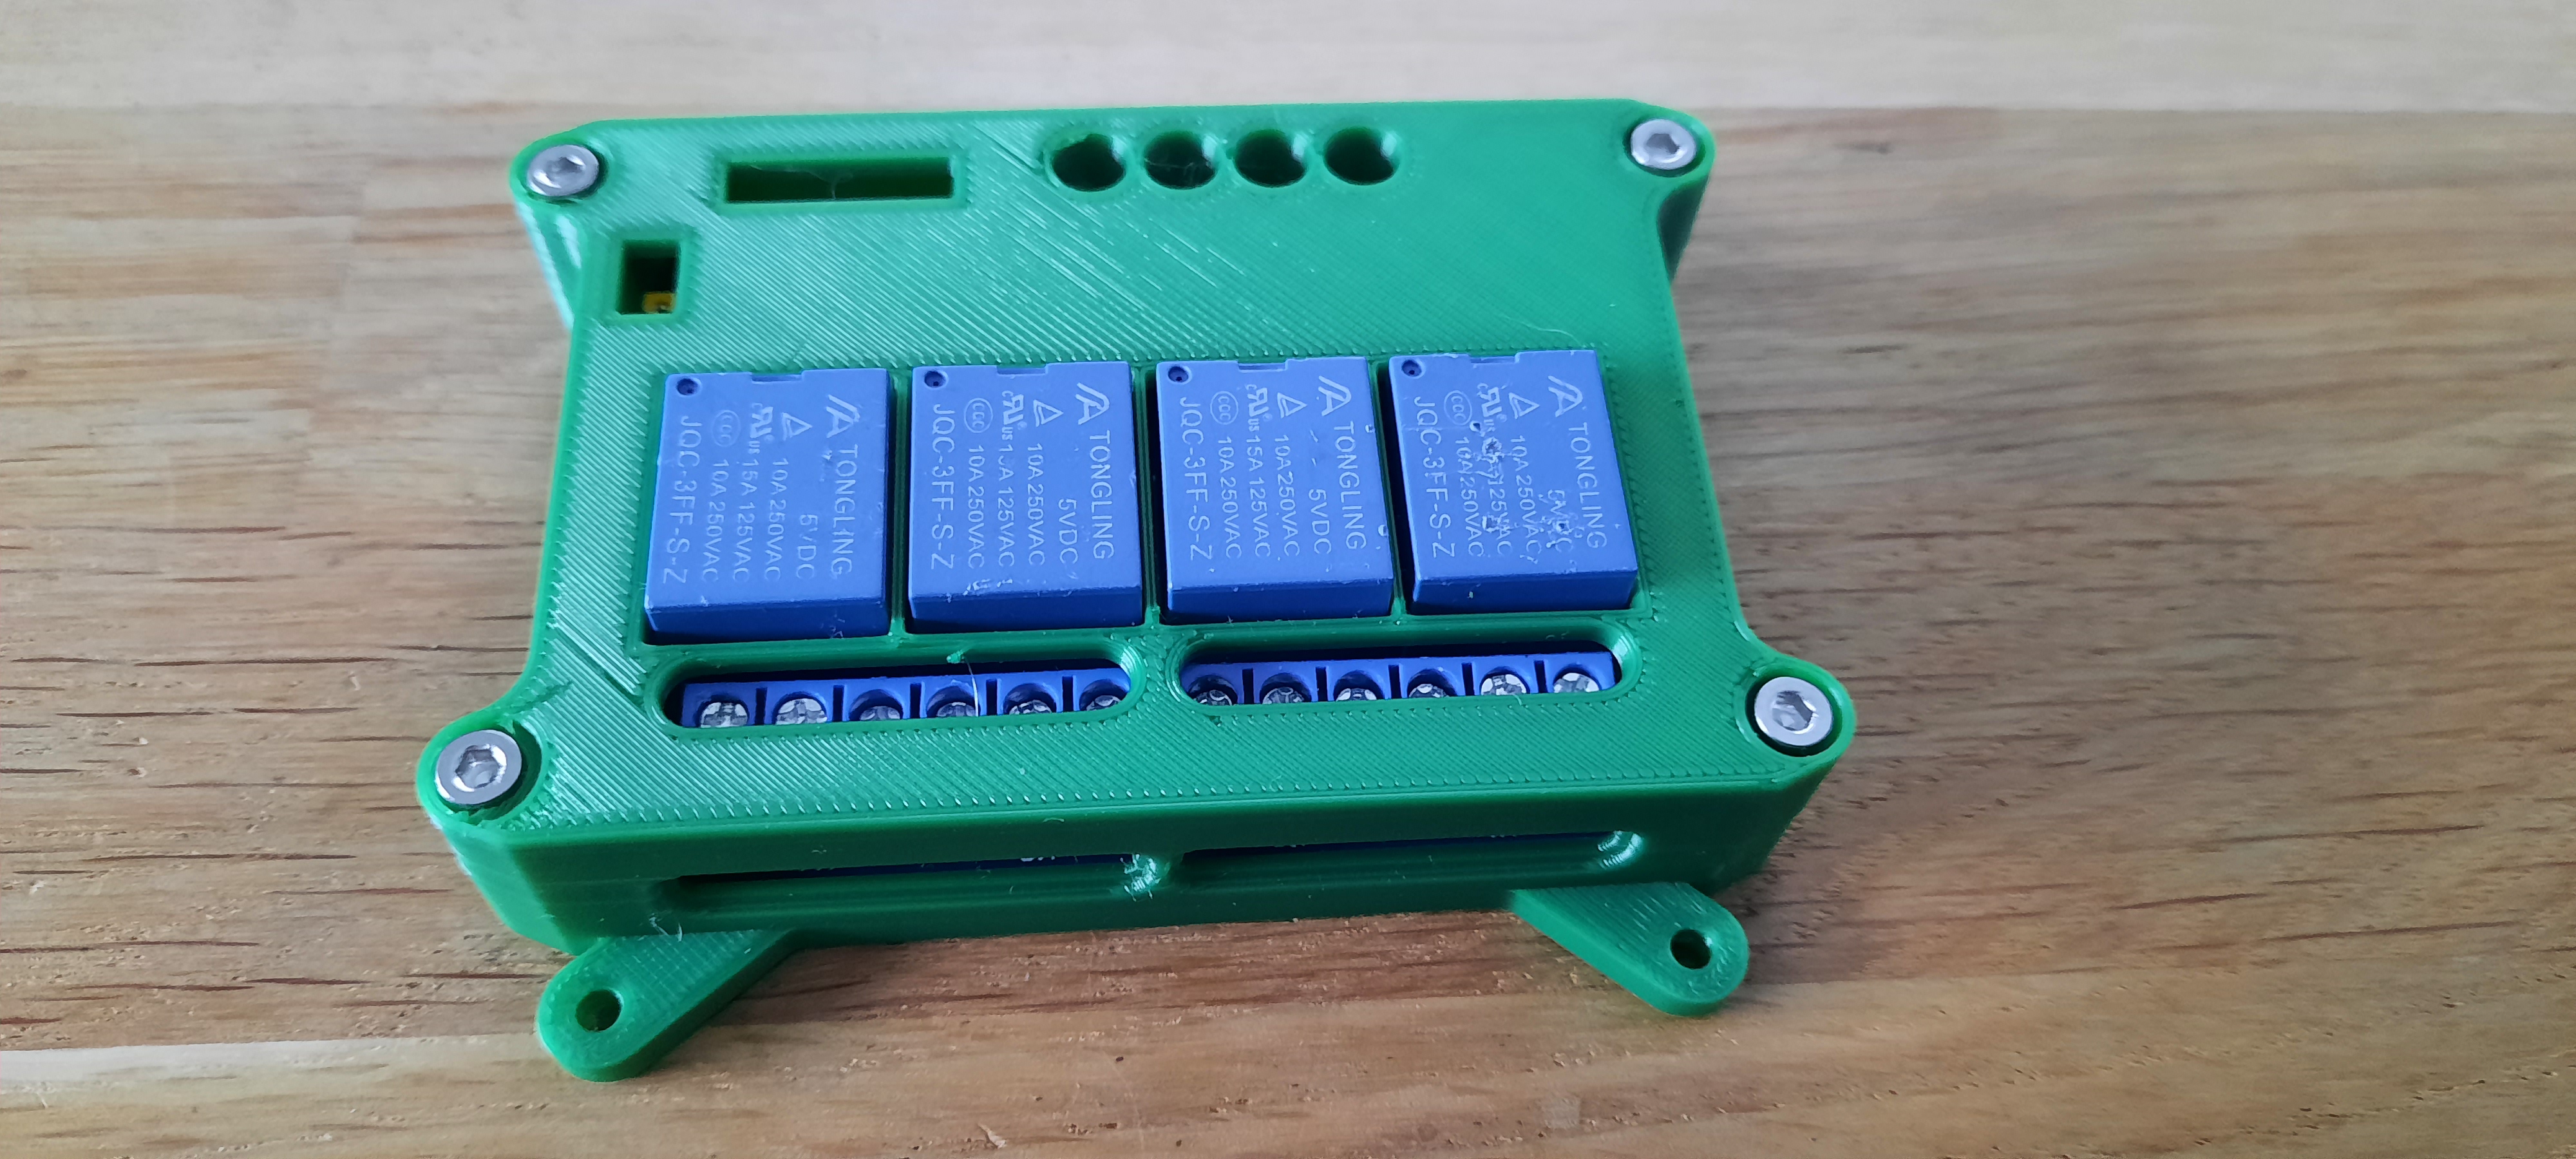 4 channel relay case